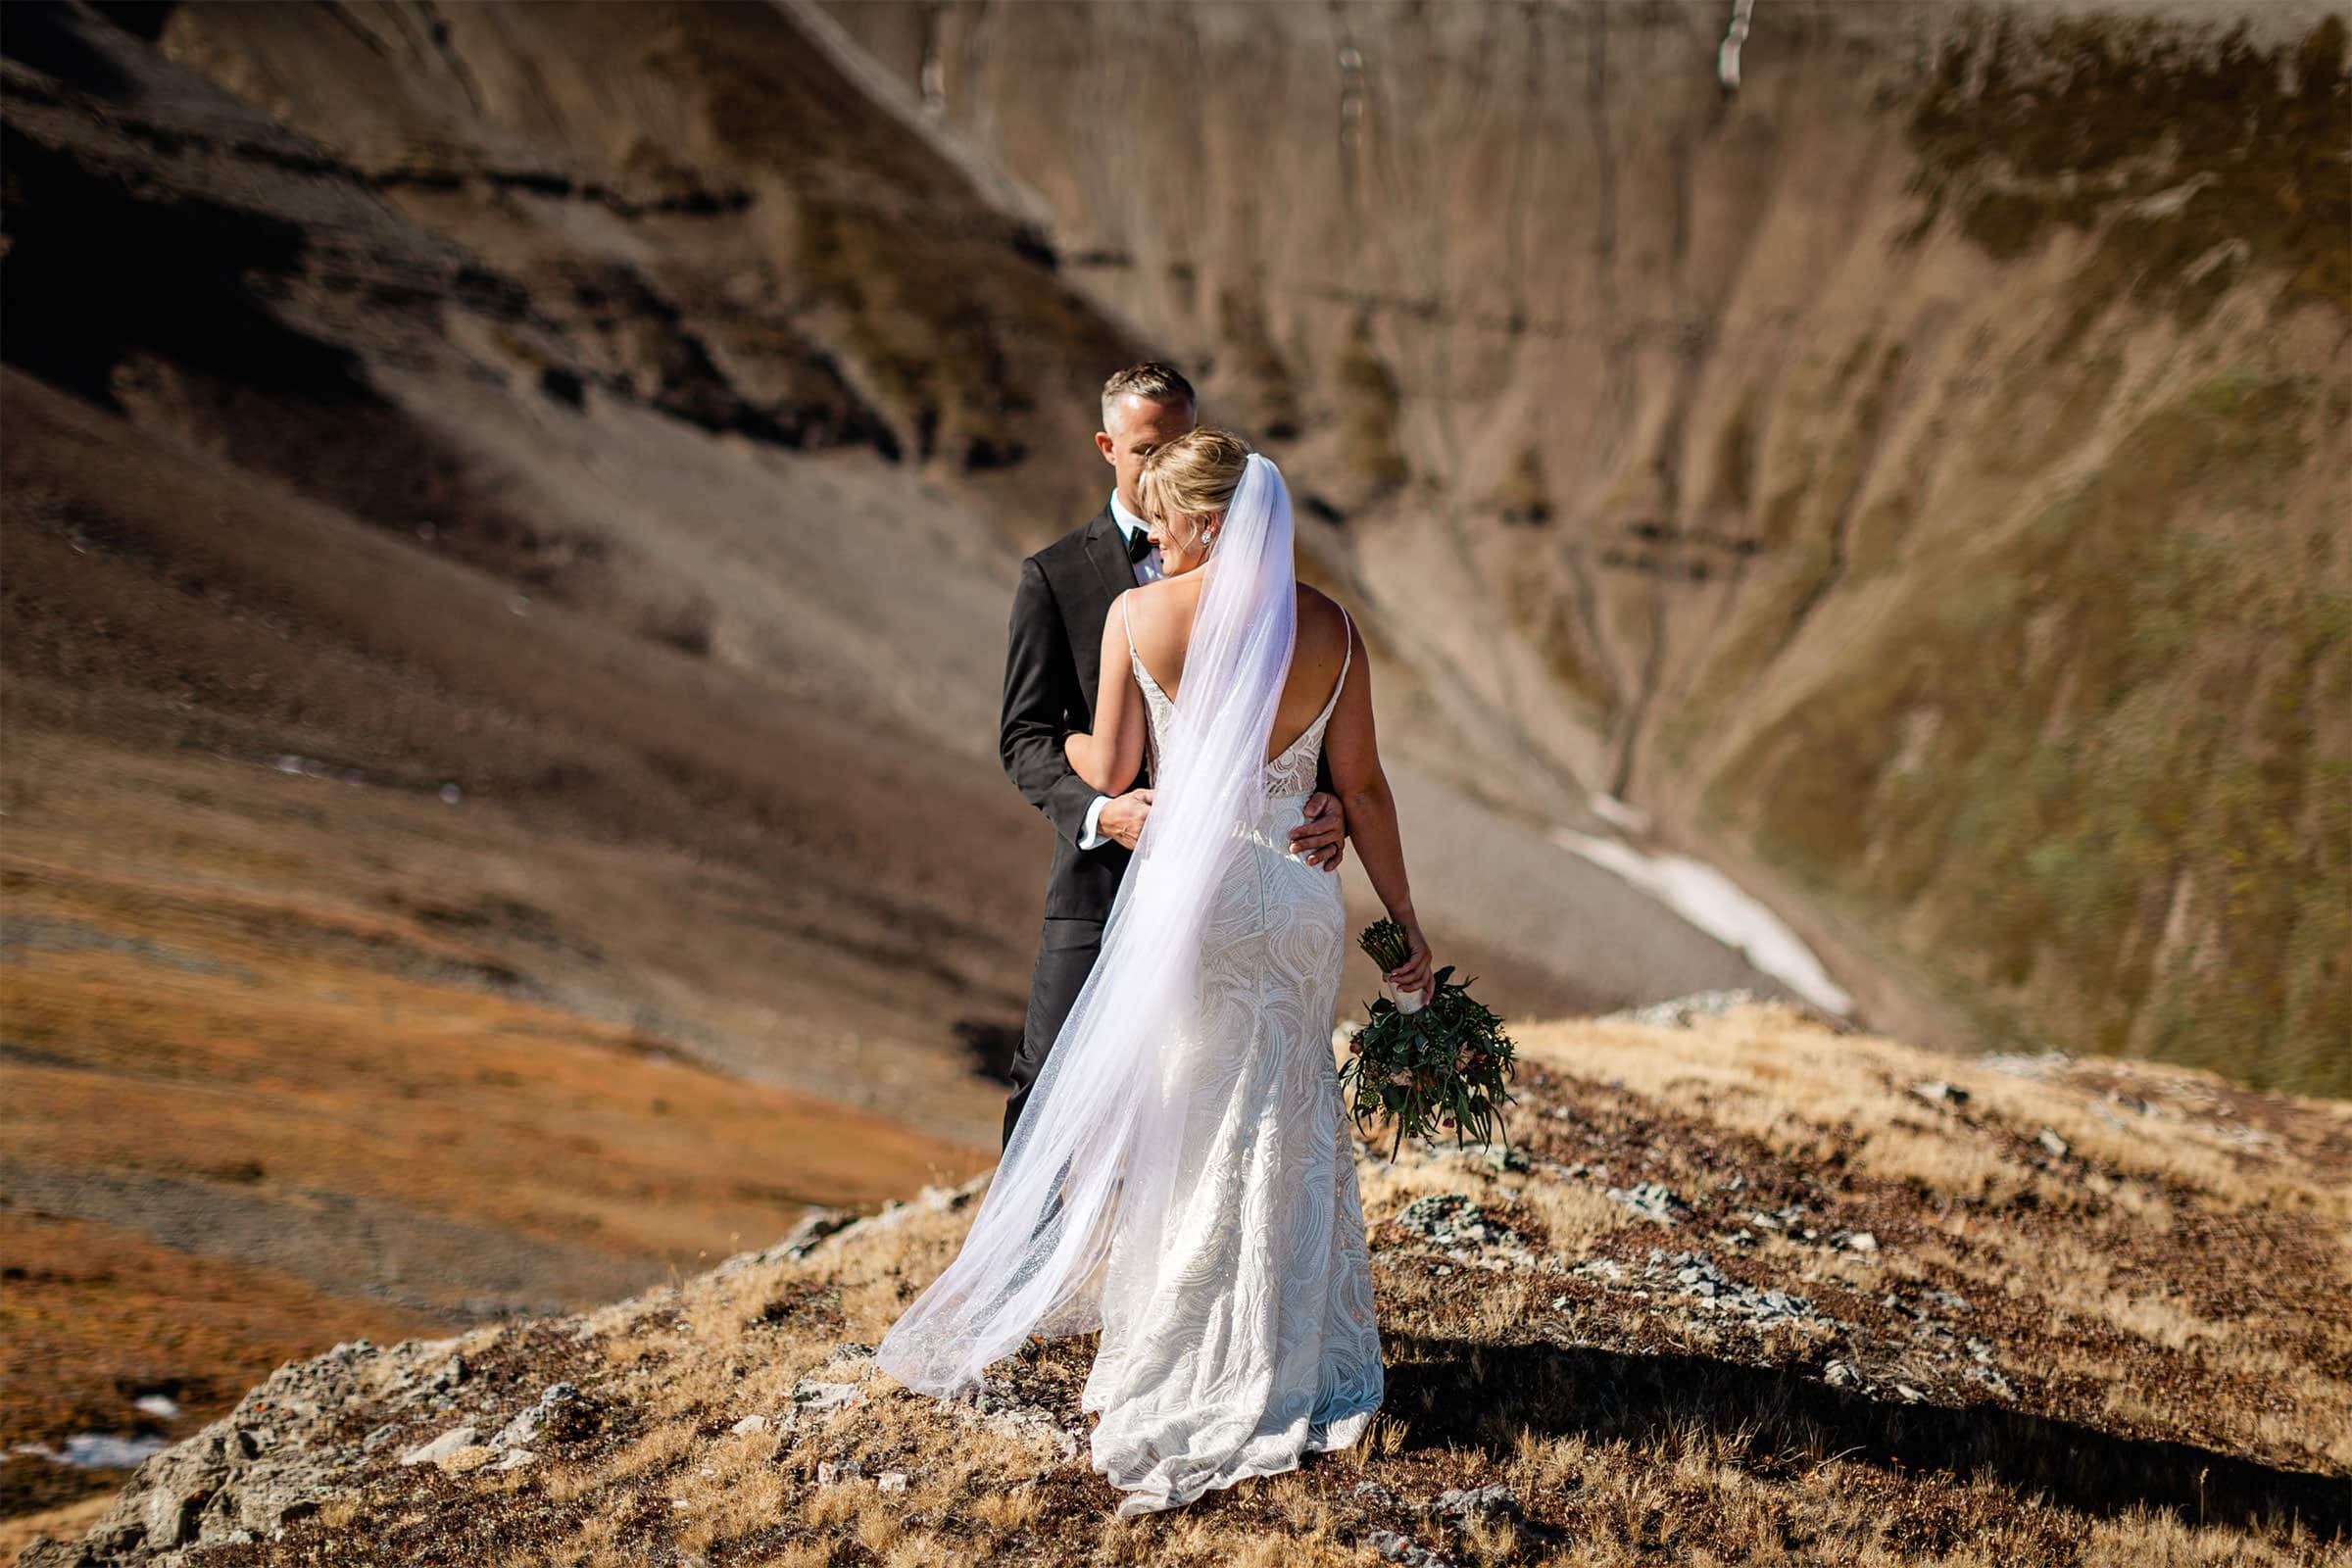 Rocky Mountain Elopements  Elope in the Canadian Rockies